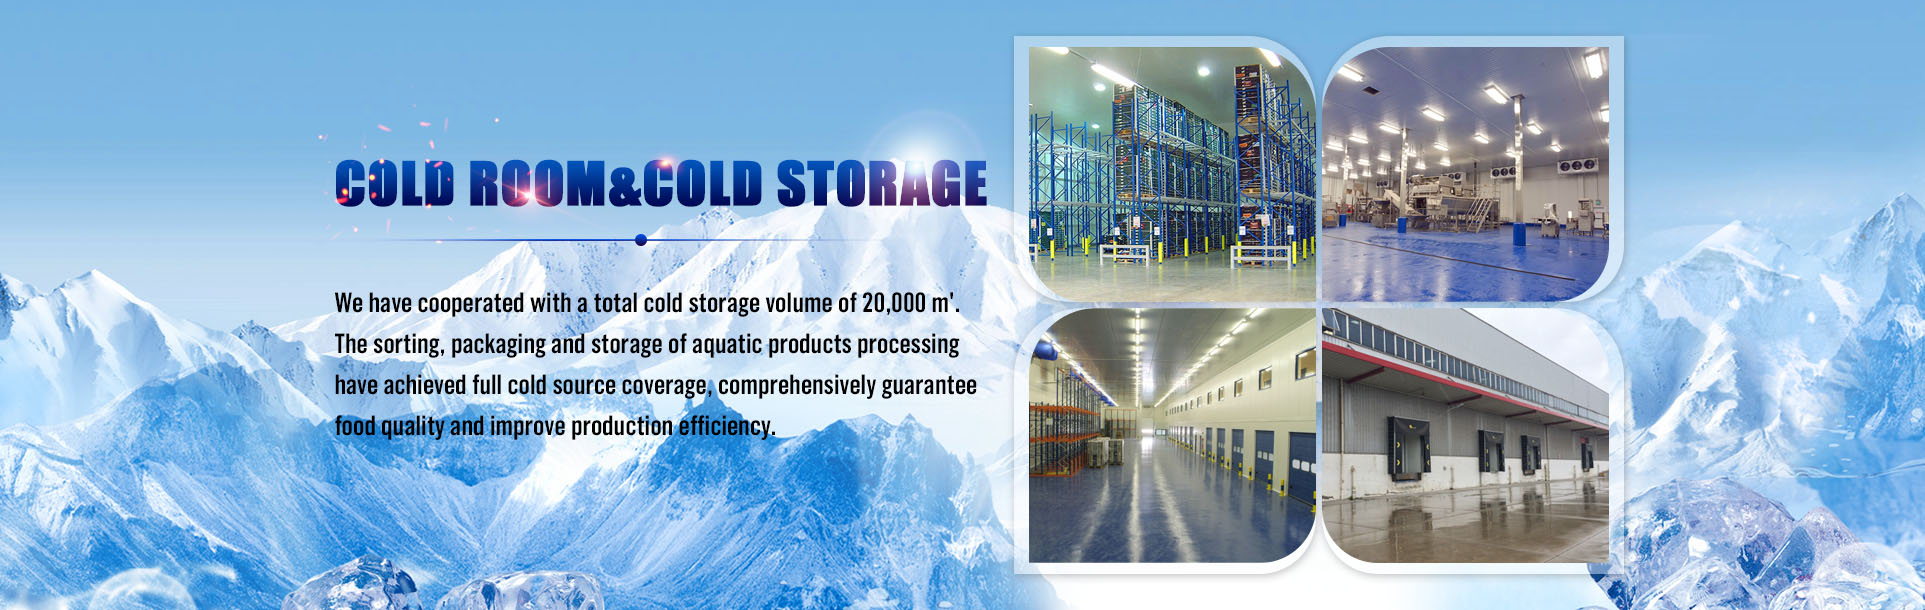 Cold Room Cold Storage